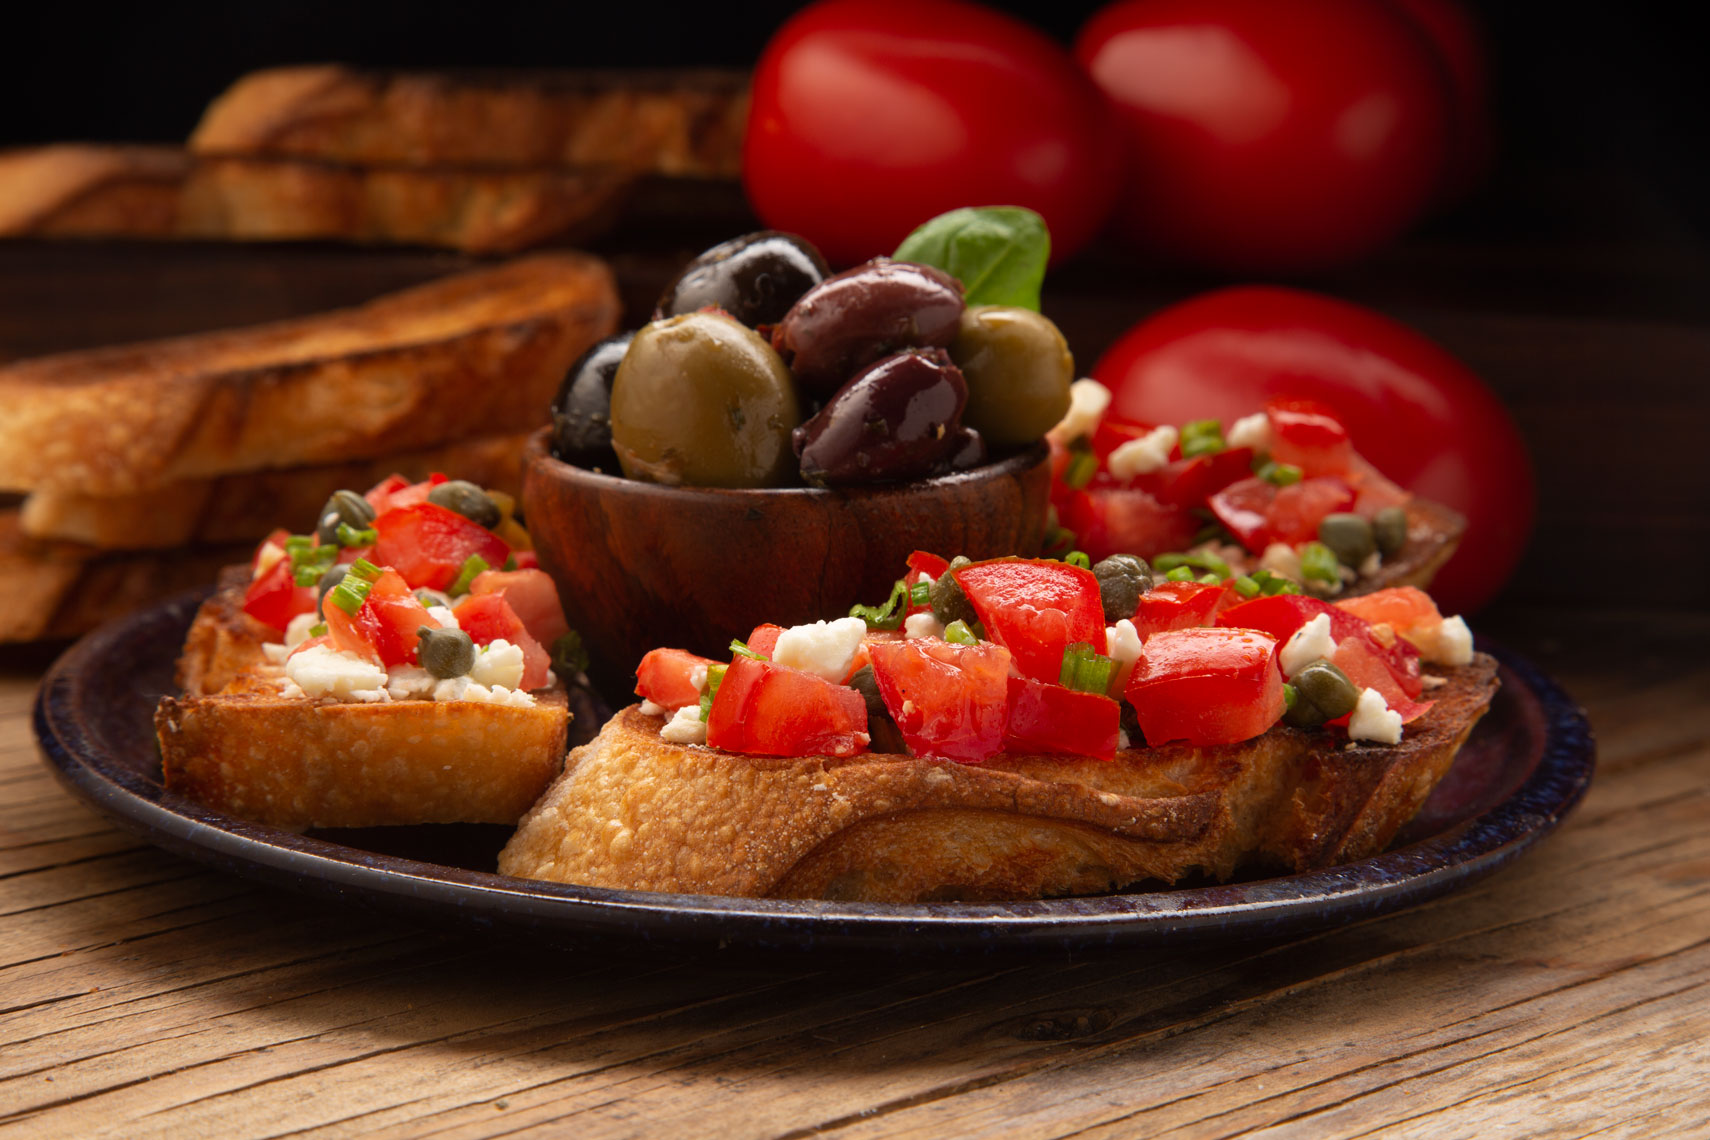 Bruschetta with olives and french bread